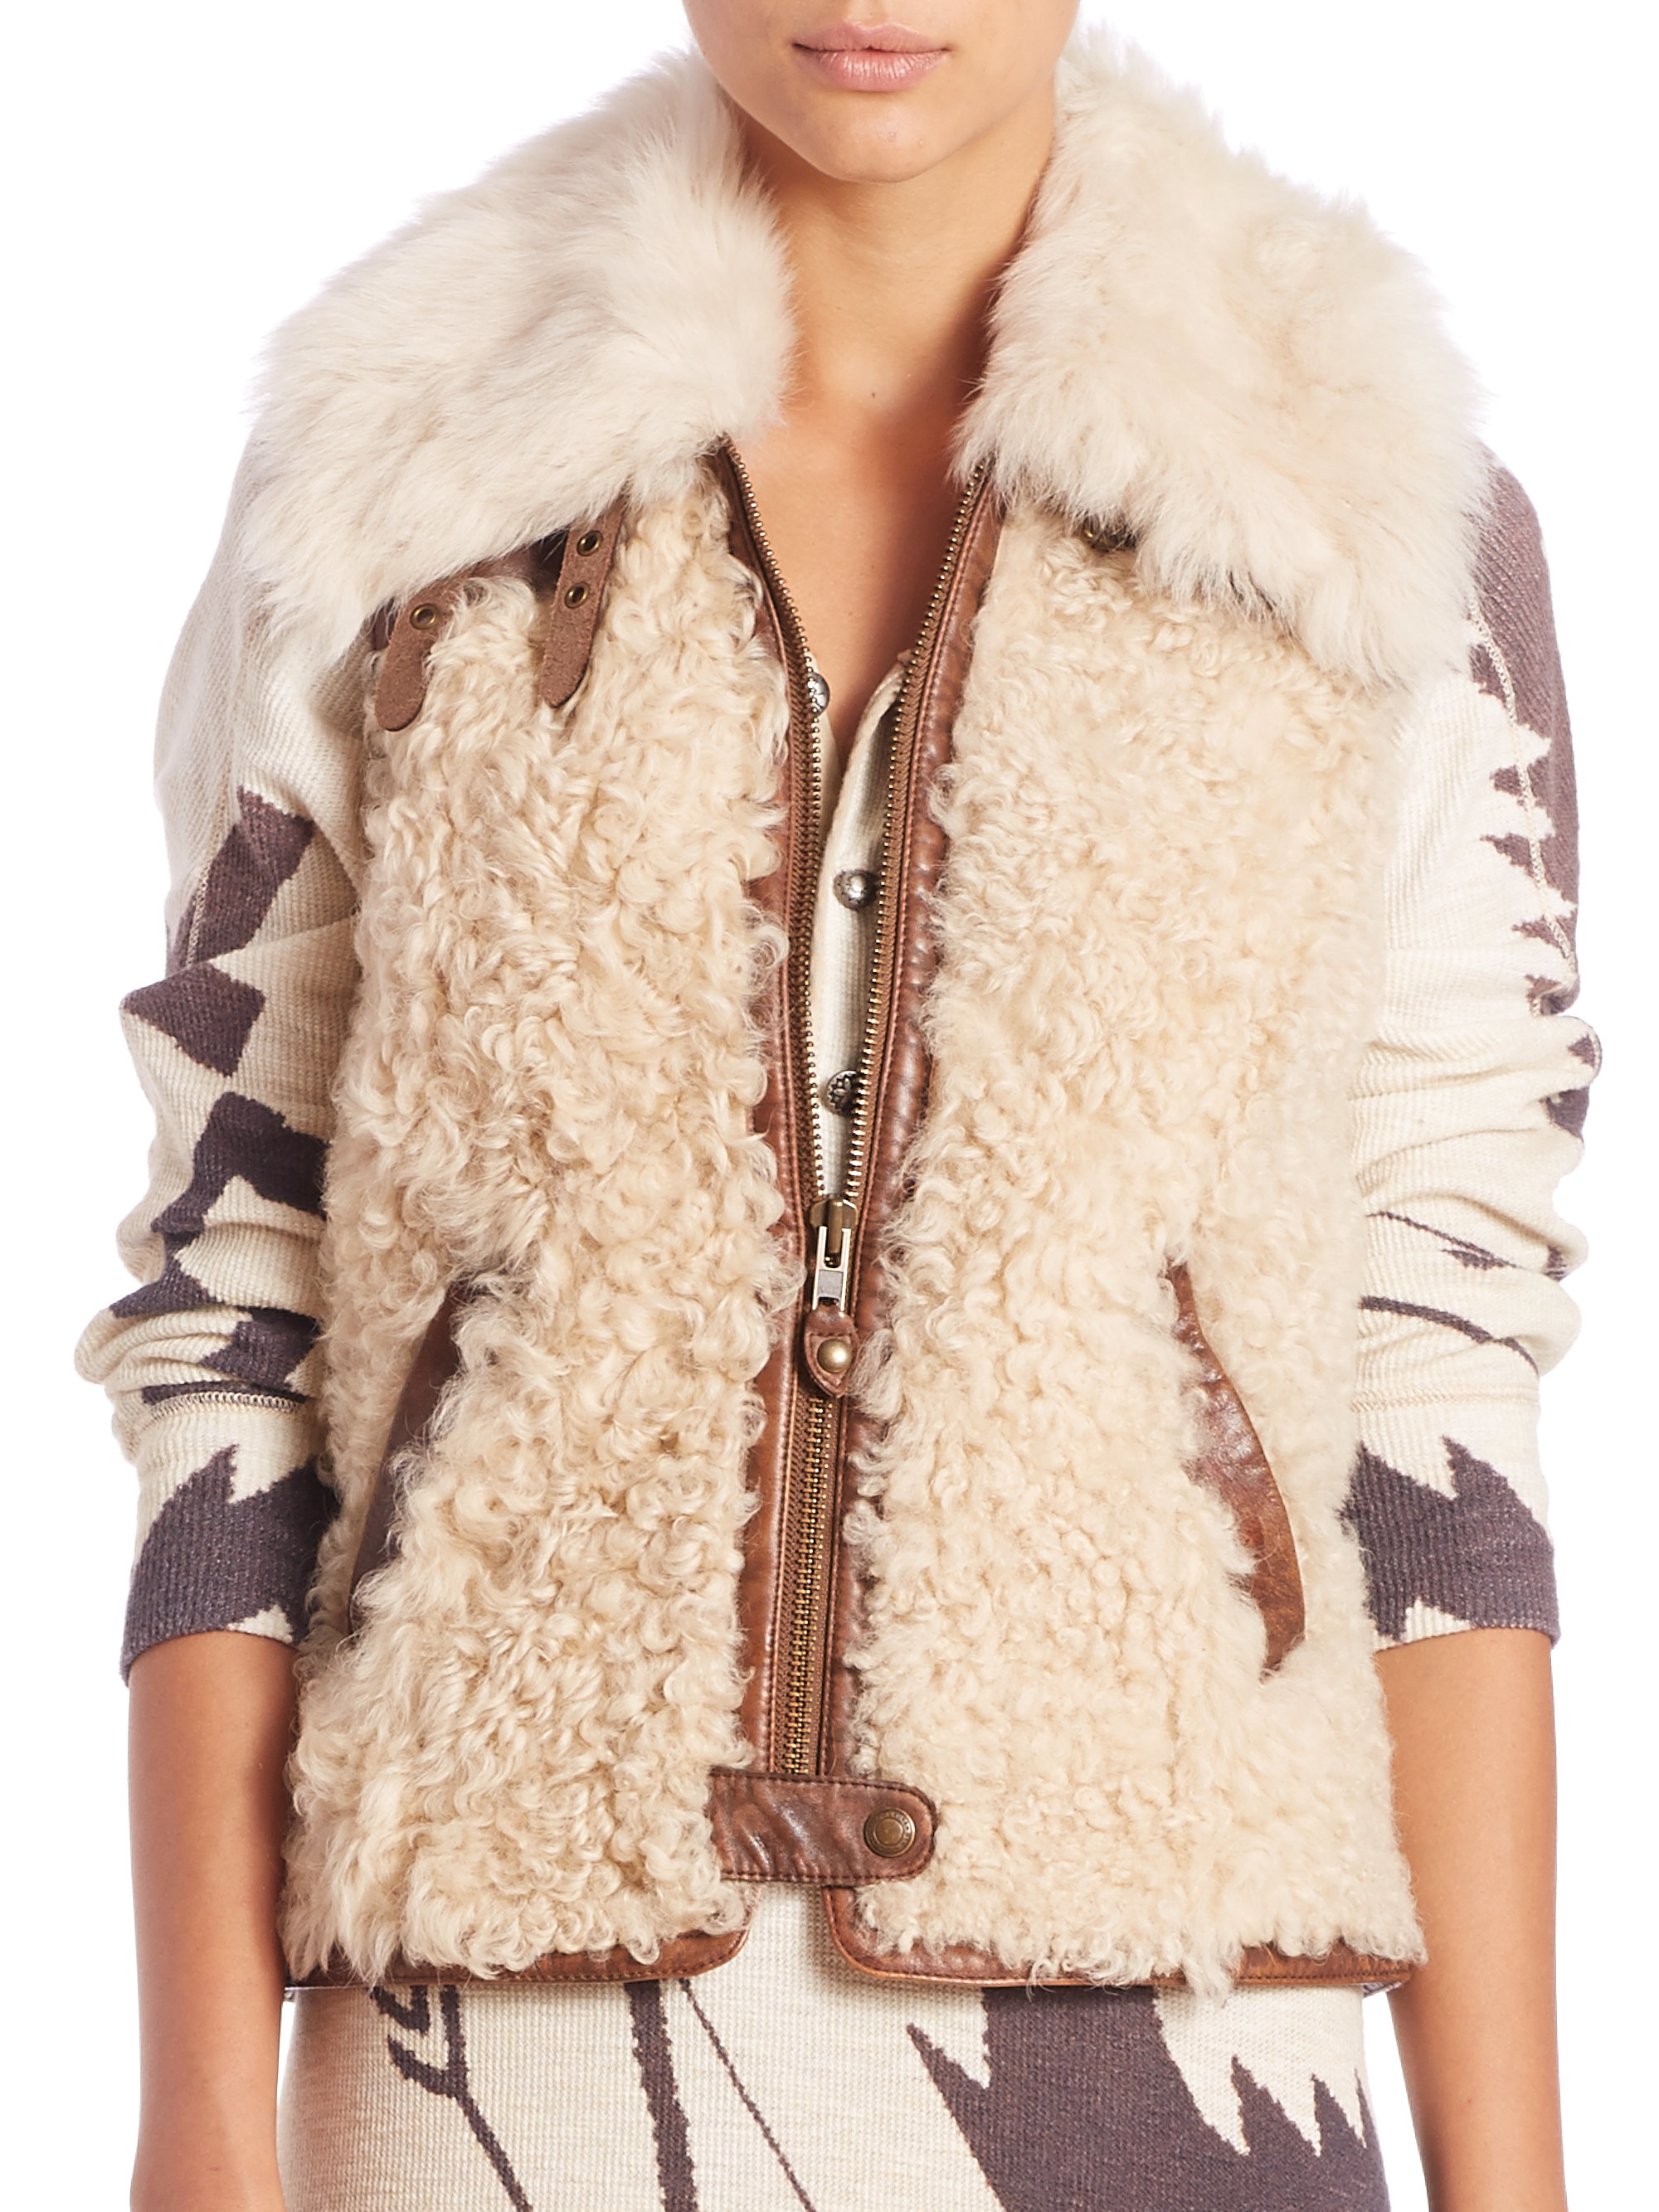 Polo Ralph Lauren Shearling Leather-trimmed Vest in Natural - Lyst